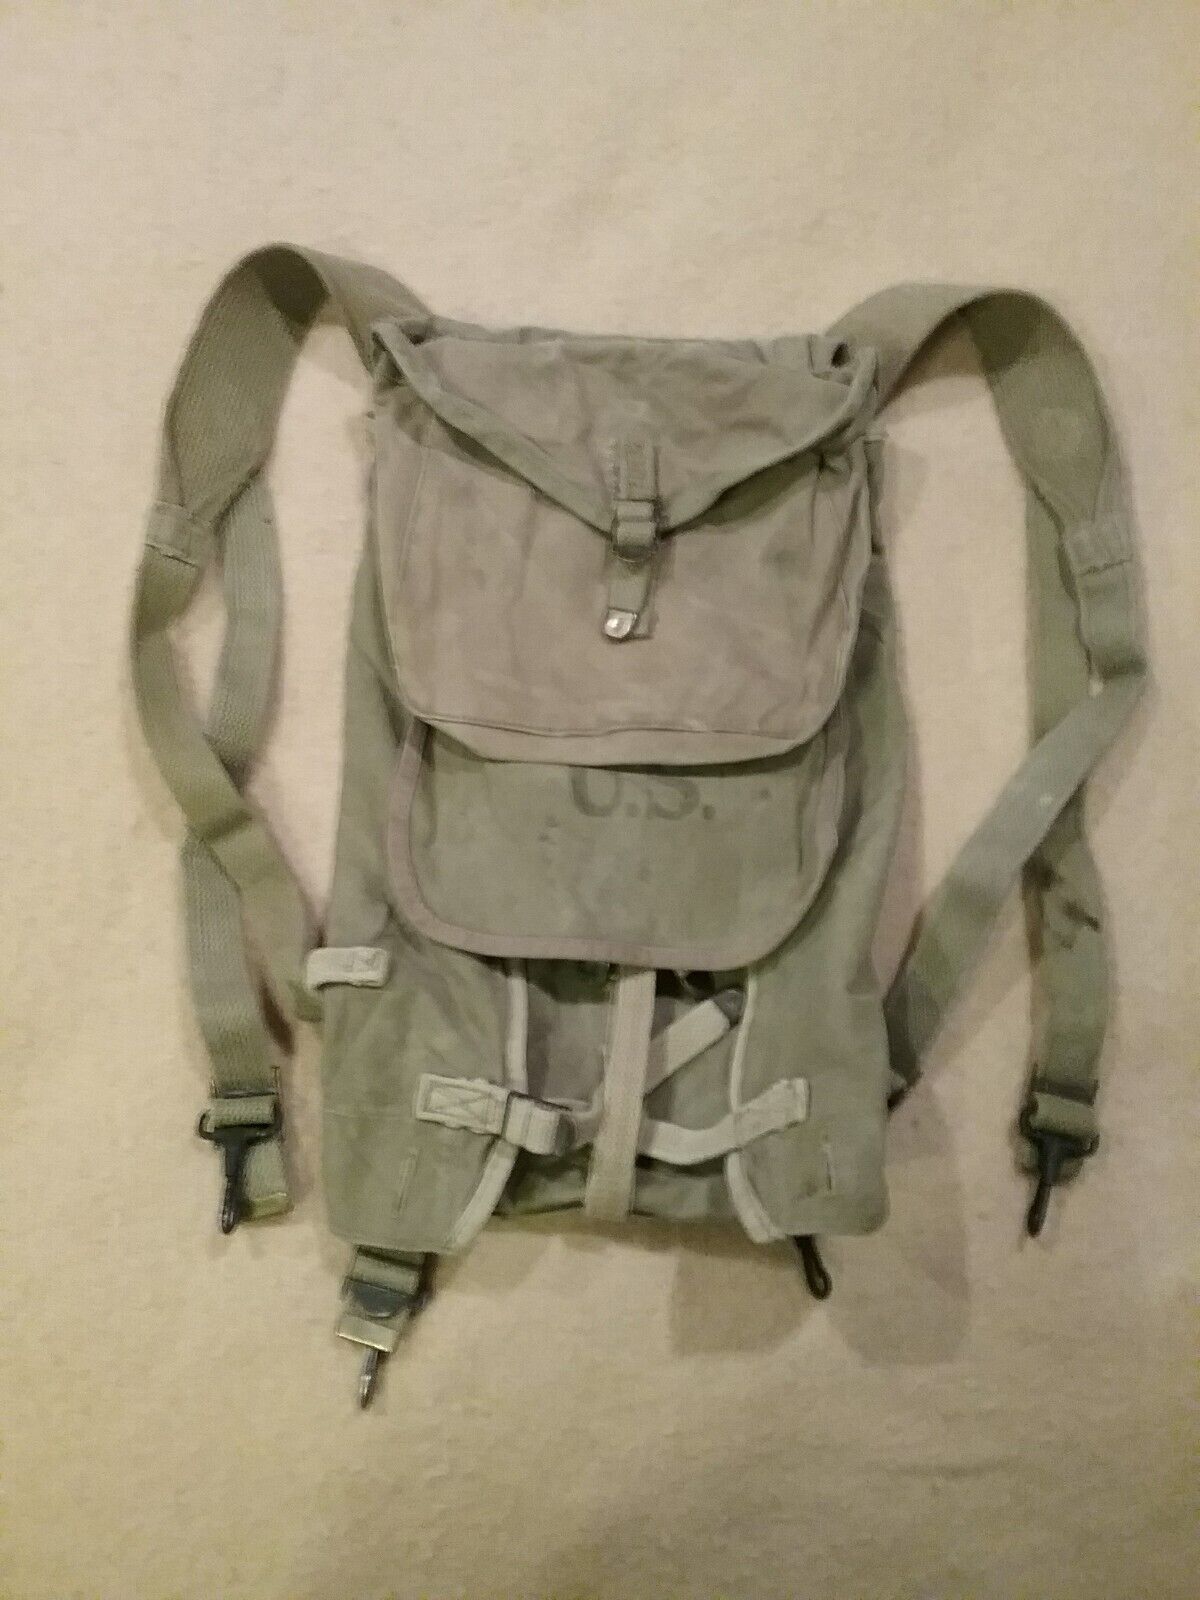 WW2 Era M-1928 Haversack With Meat Can Pouch.